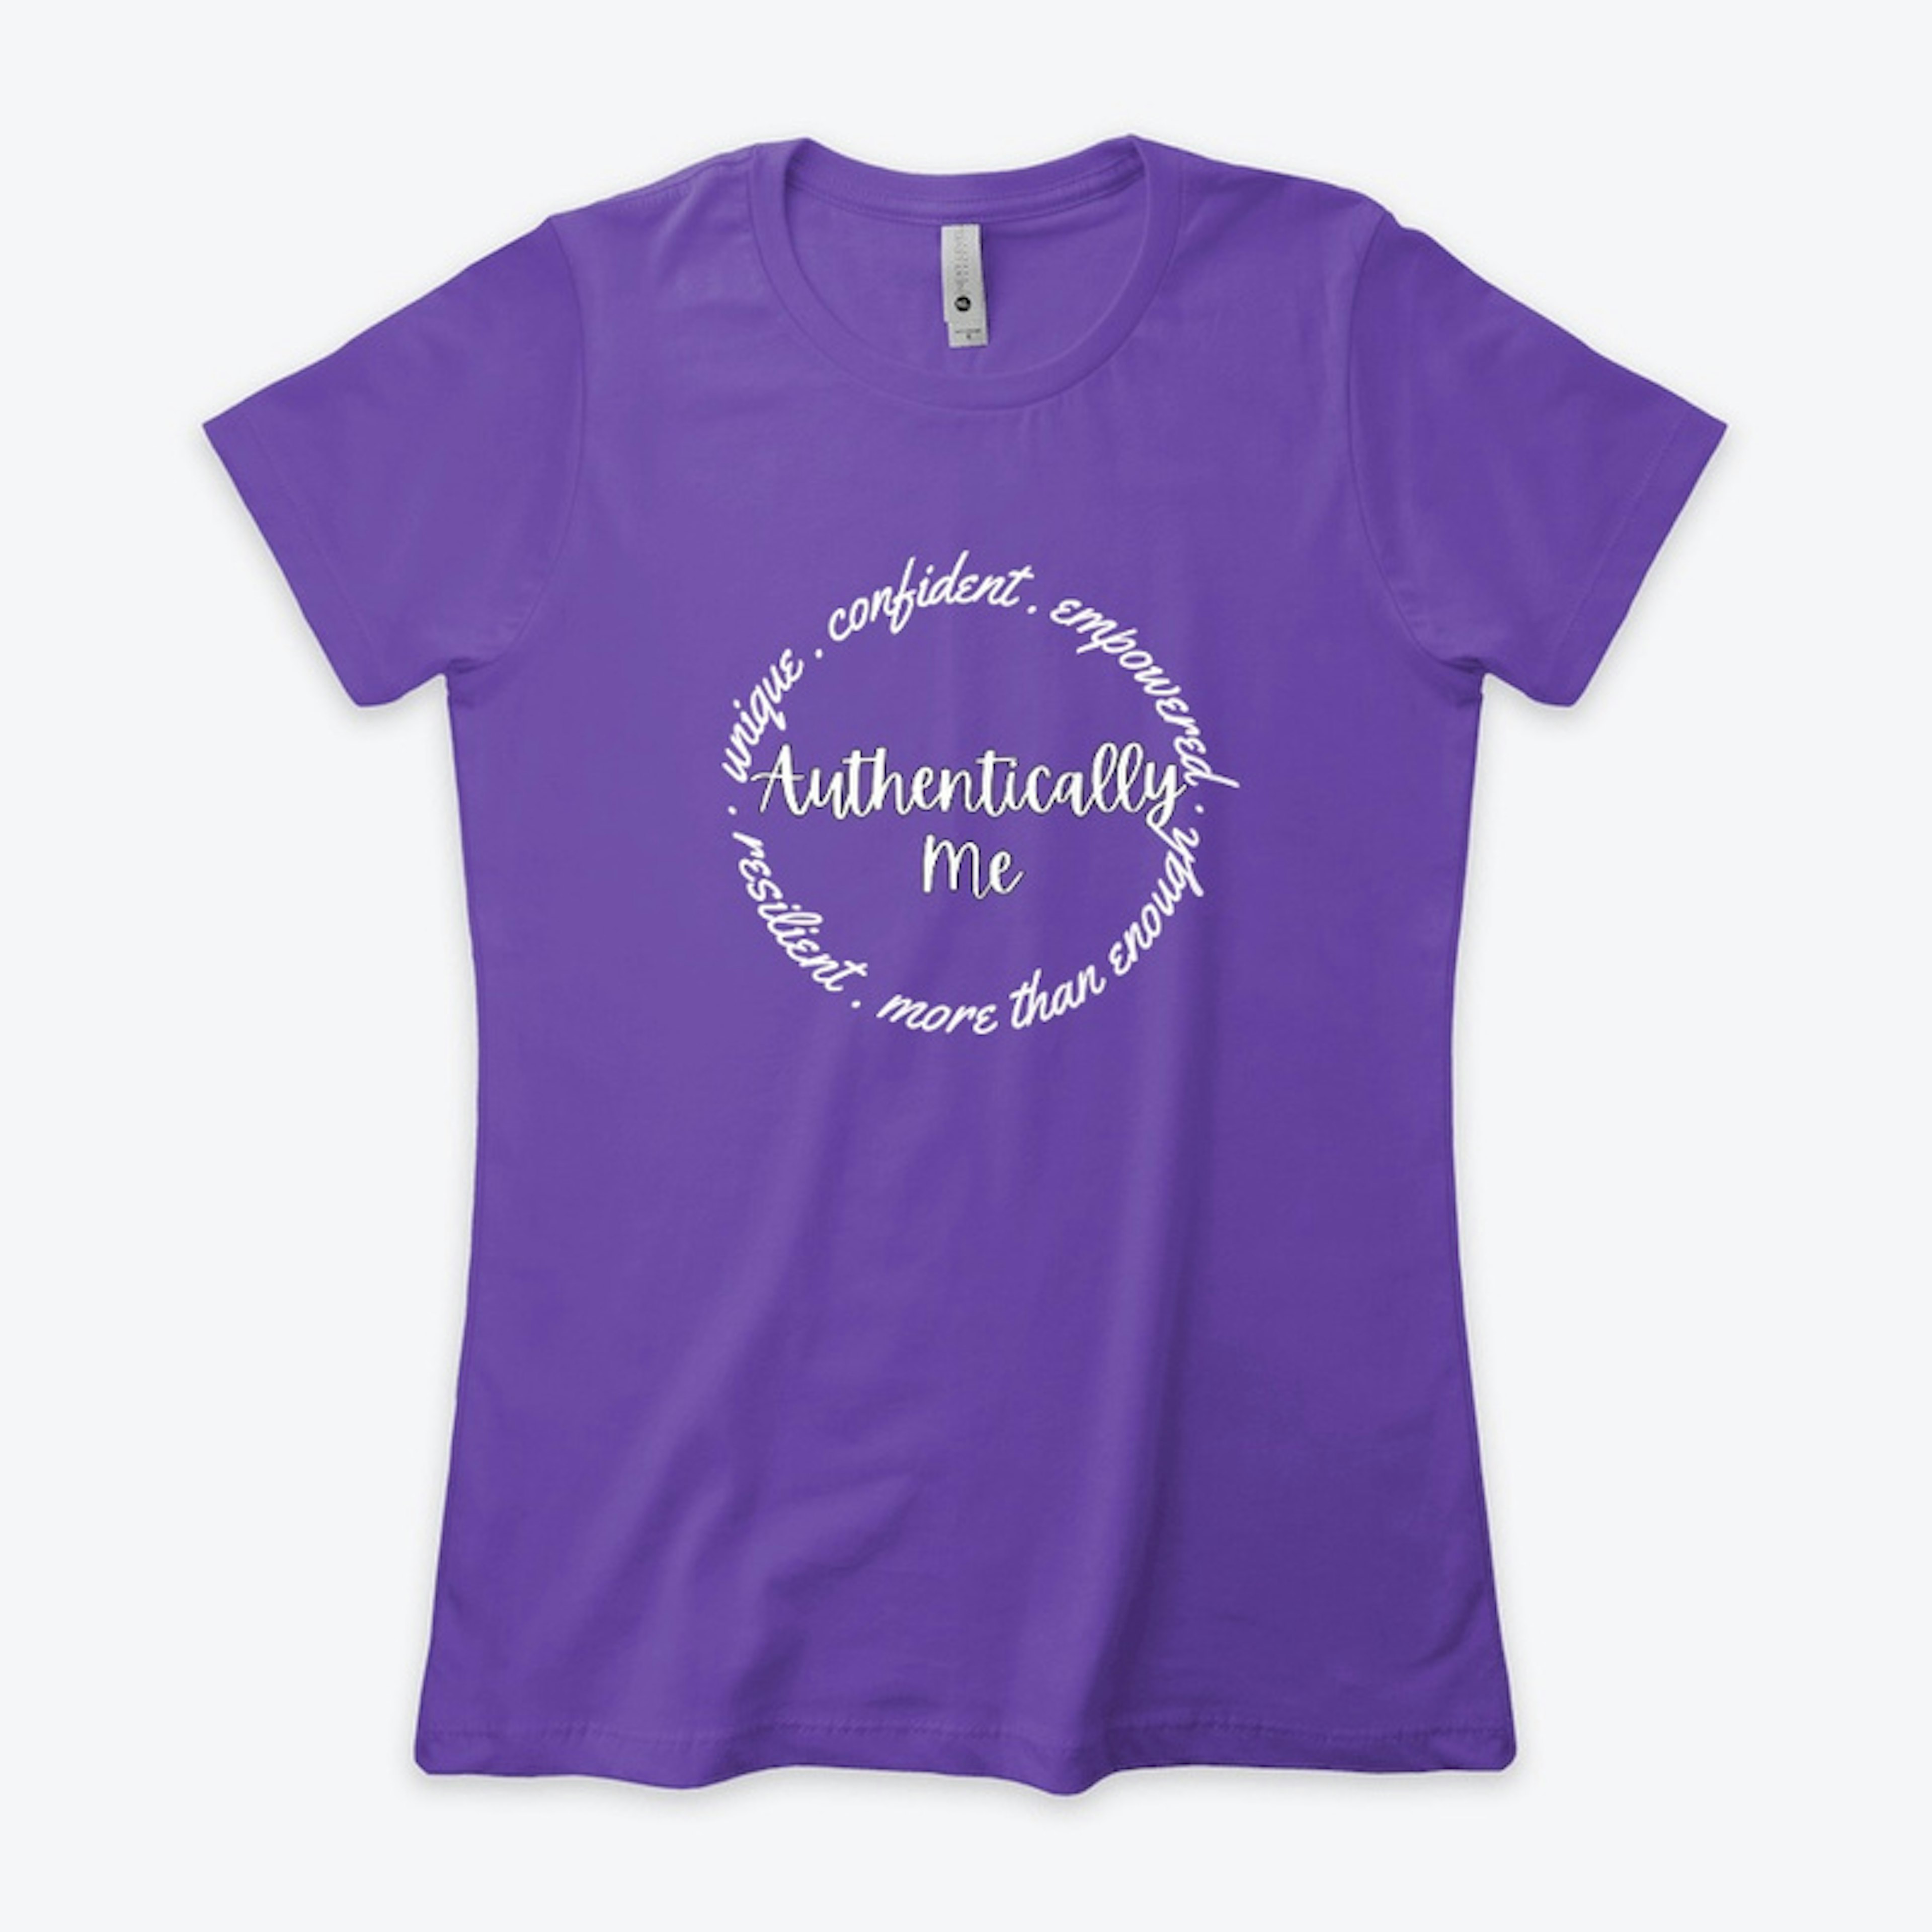 "Authentically Me" Inspirational Tshirt